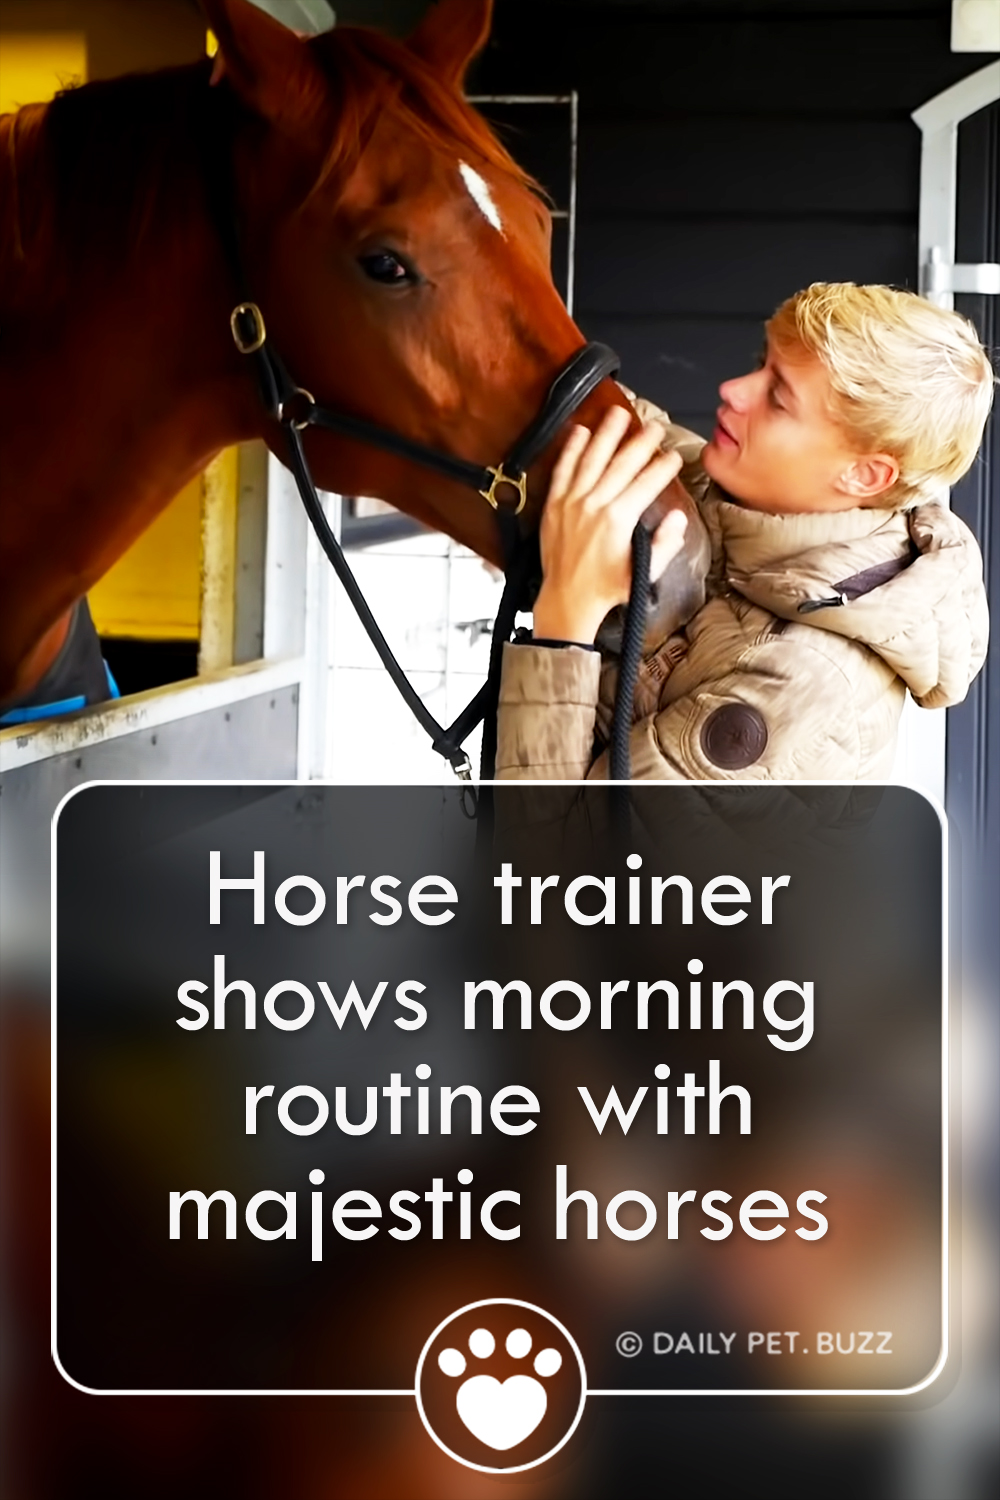 Horse trainer shows morning routine with majestic horses